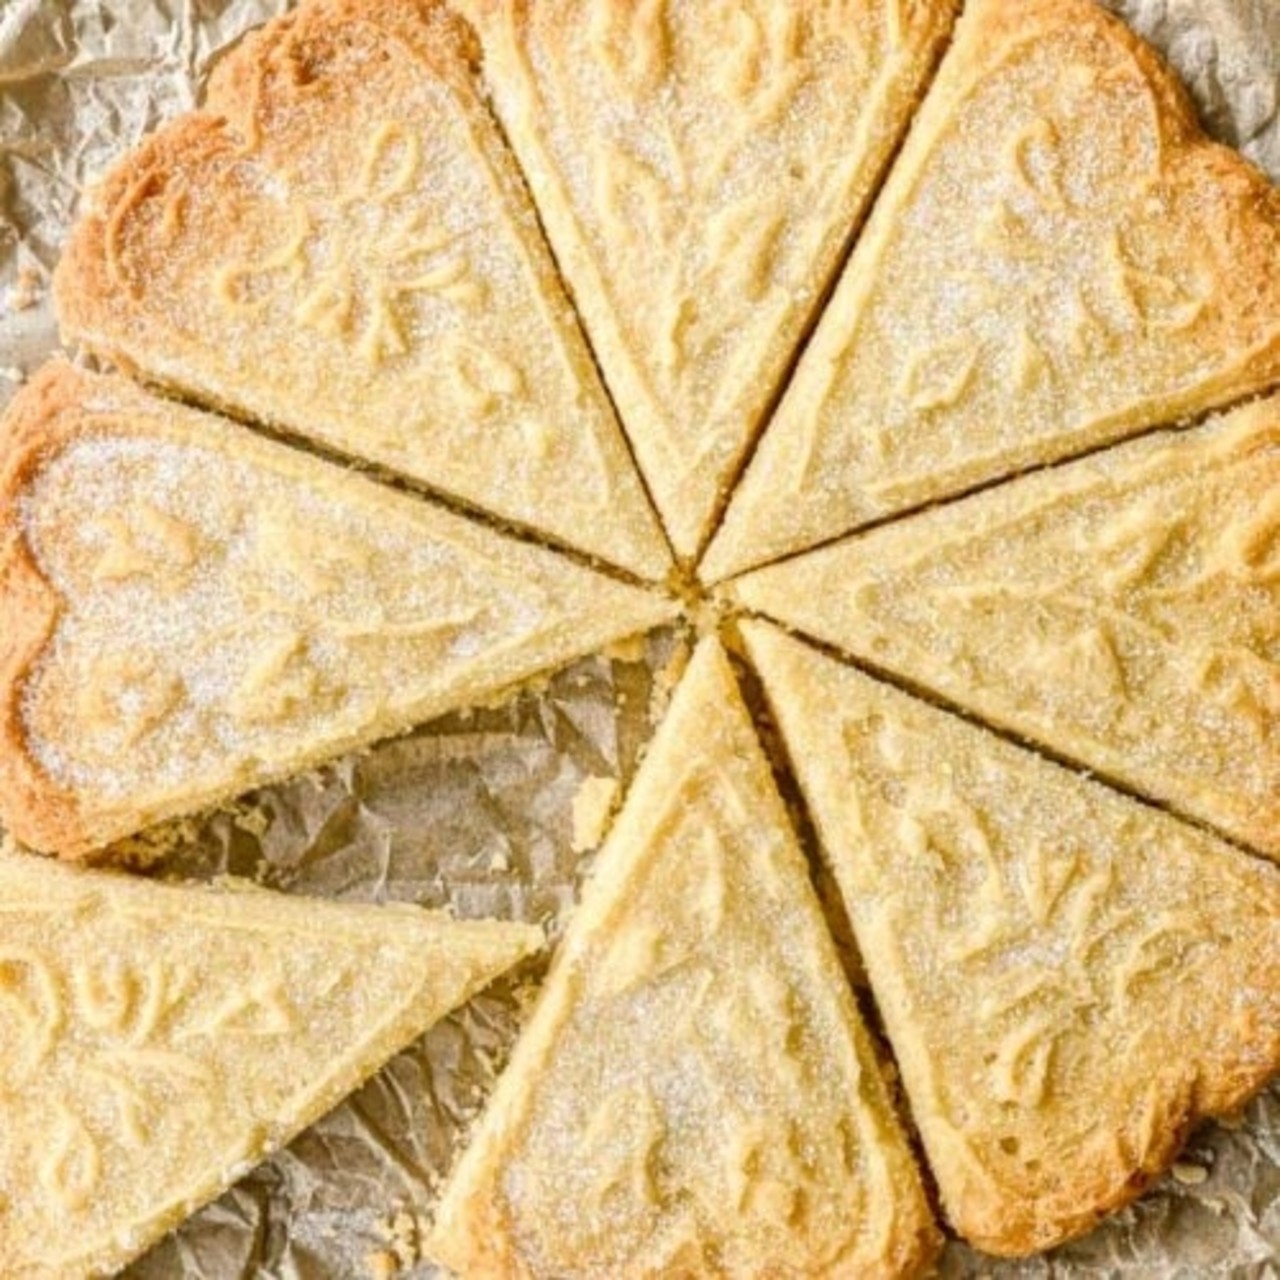 Professional Baker Teaches You How To Make SCOTTISH SHORTBREAD